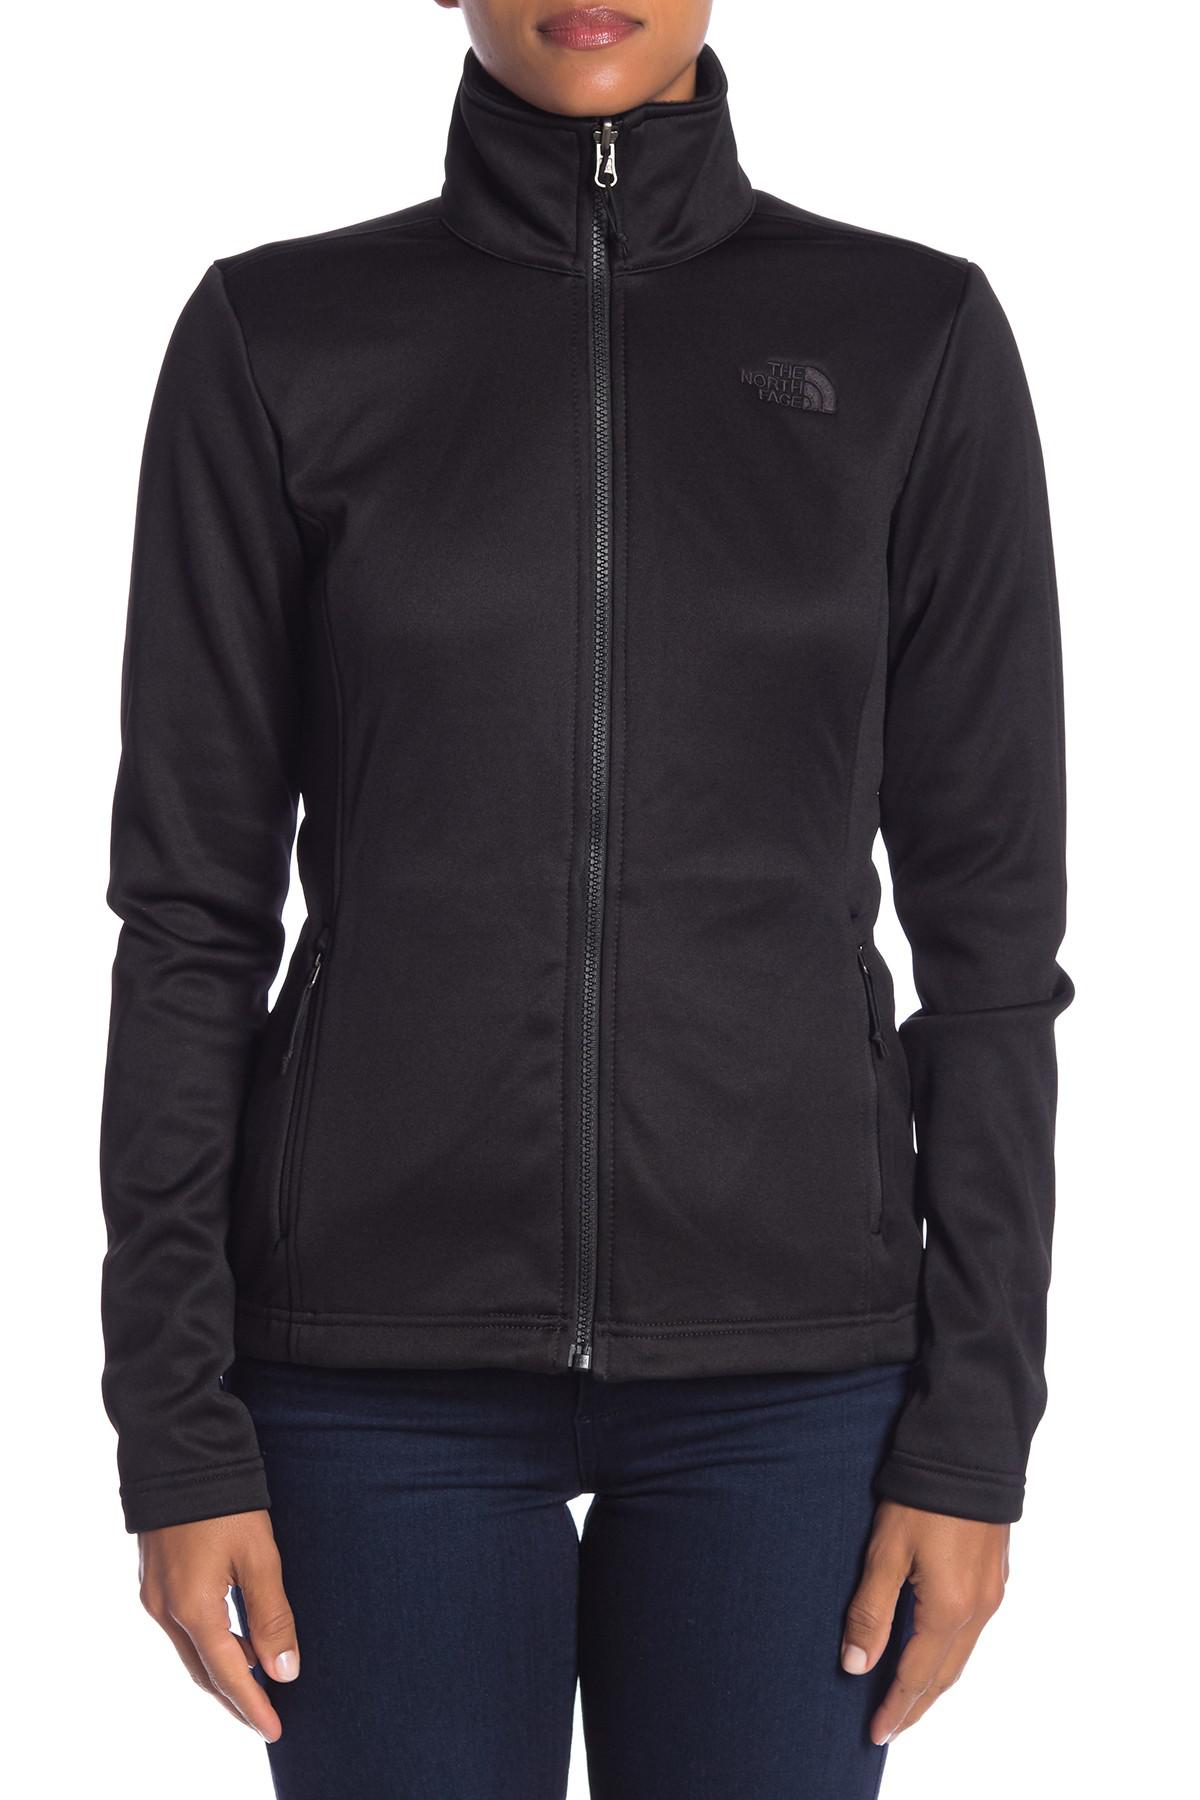 The North Face Fleece Track 2-in-1 Removable Hood Jacket in Black - Lyst